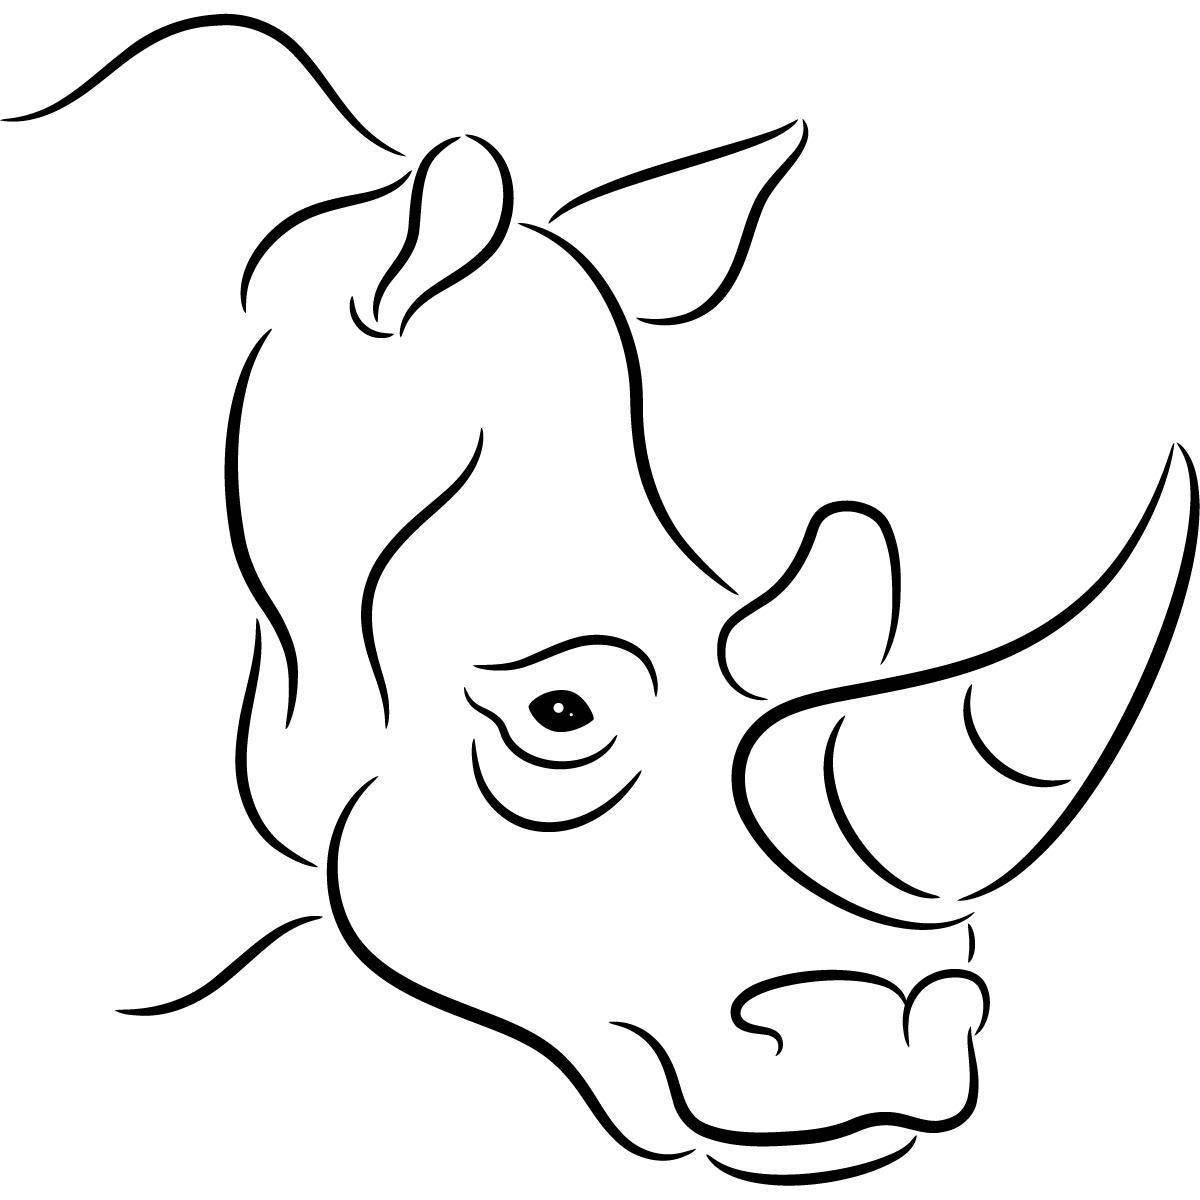 Outline Of Rhino Clipart Best